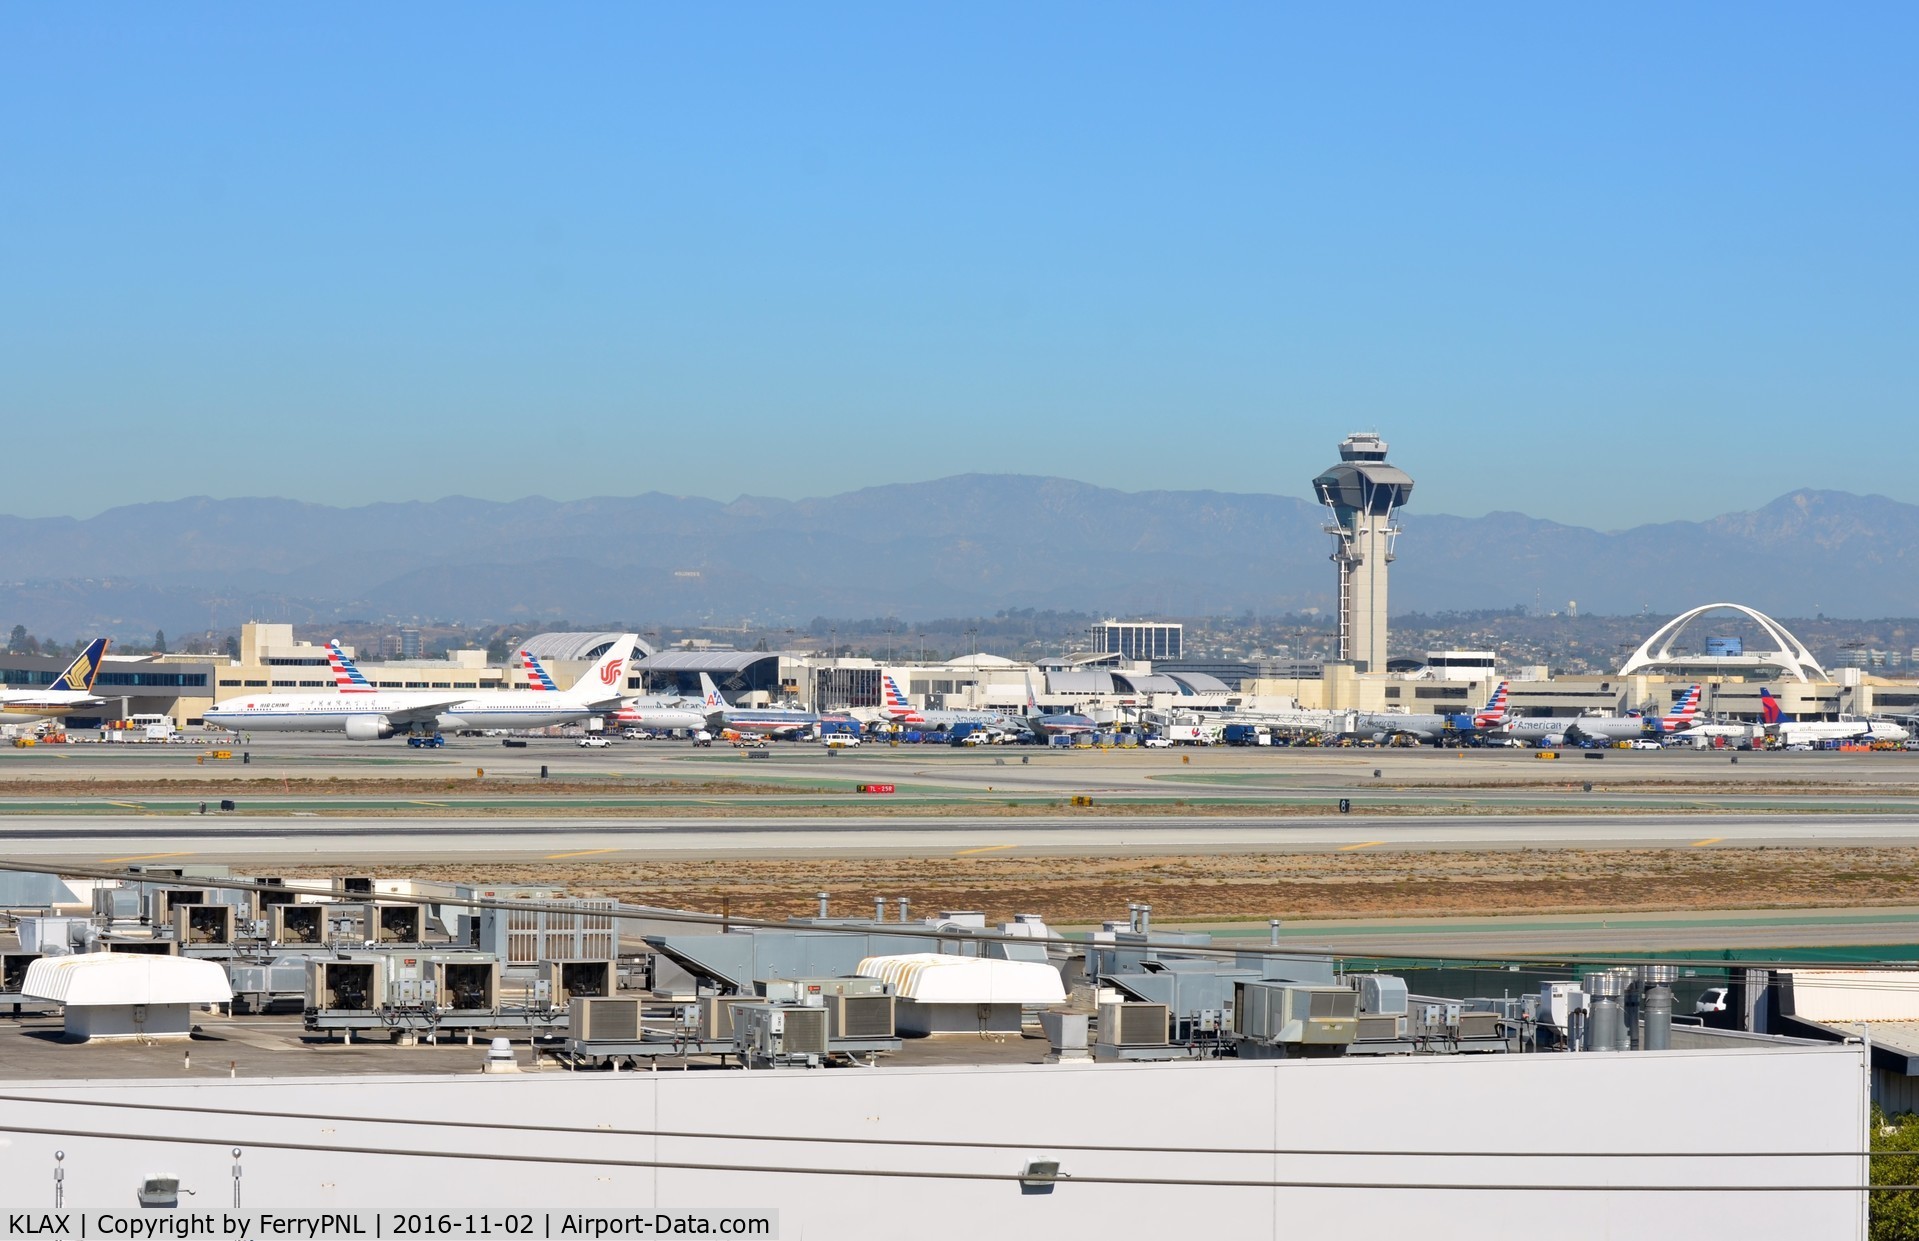 Los Angeles International Airport (LAX) - LAX overview from Imperial Hill